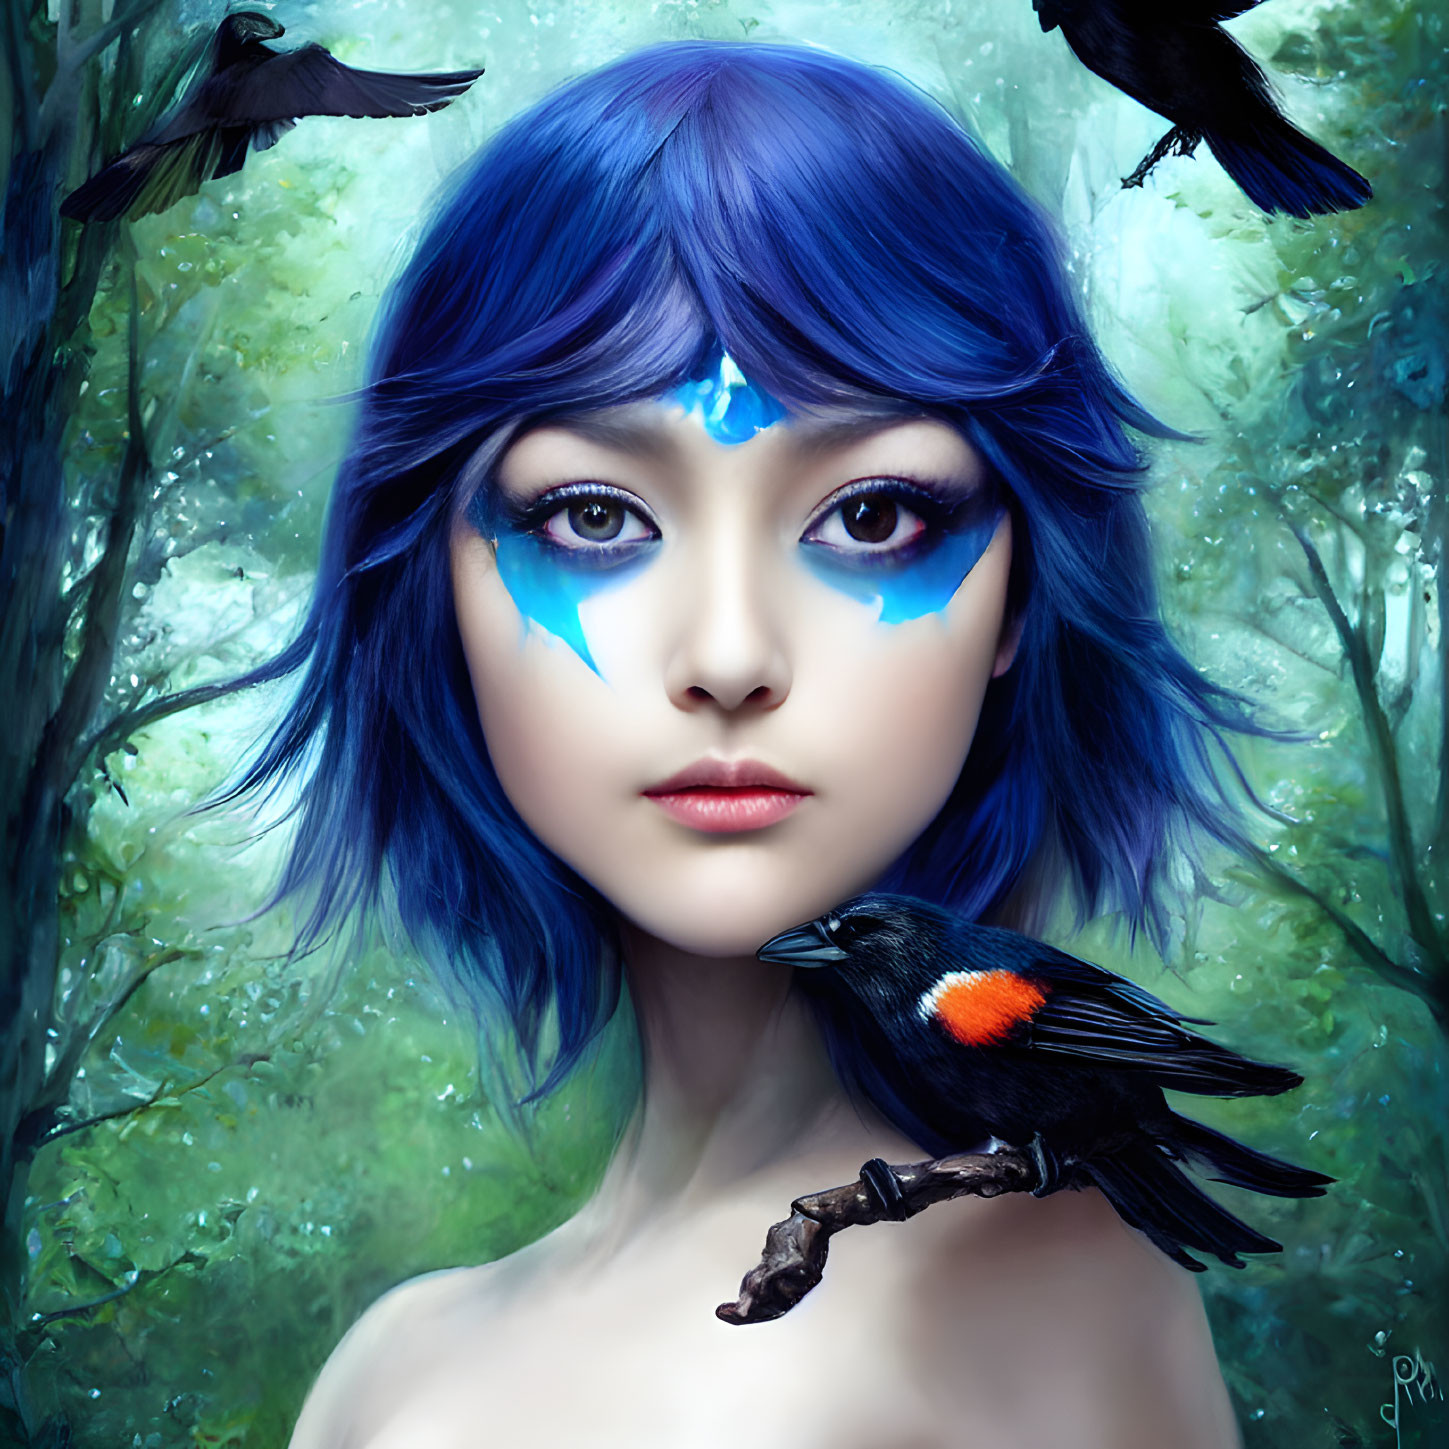 Fantasy Artwork: Female Figure with Blue Hair and Tribal Markings in Crow-Filled Forest